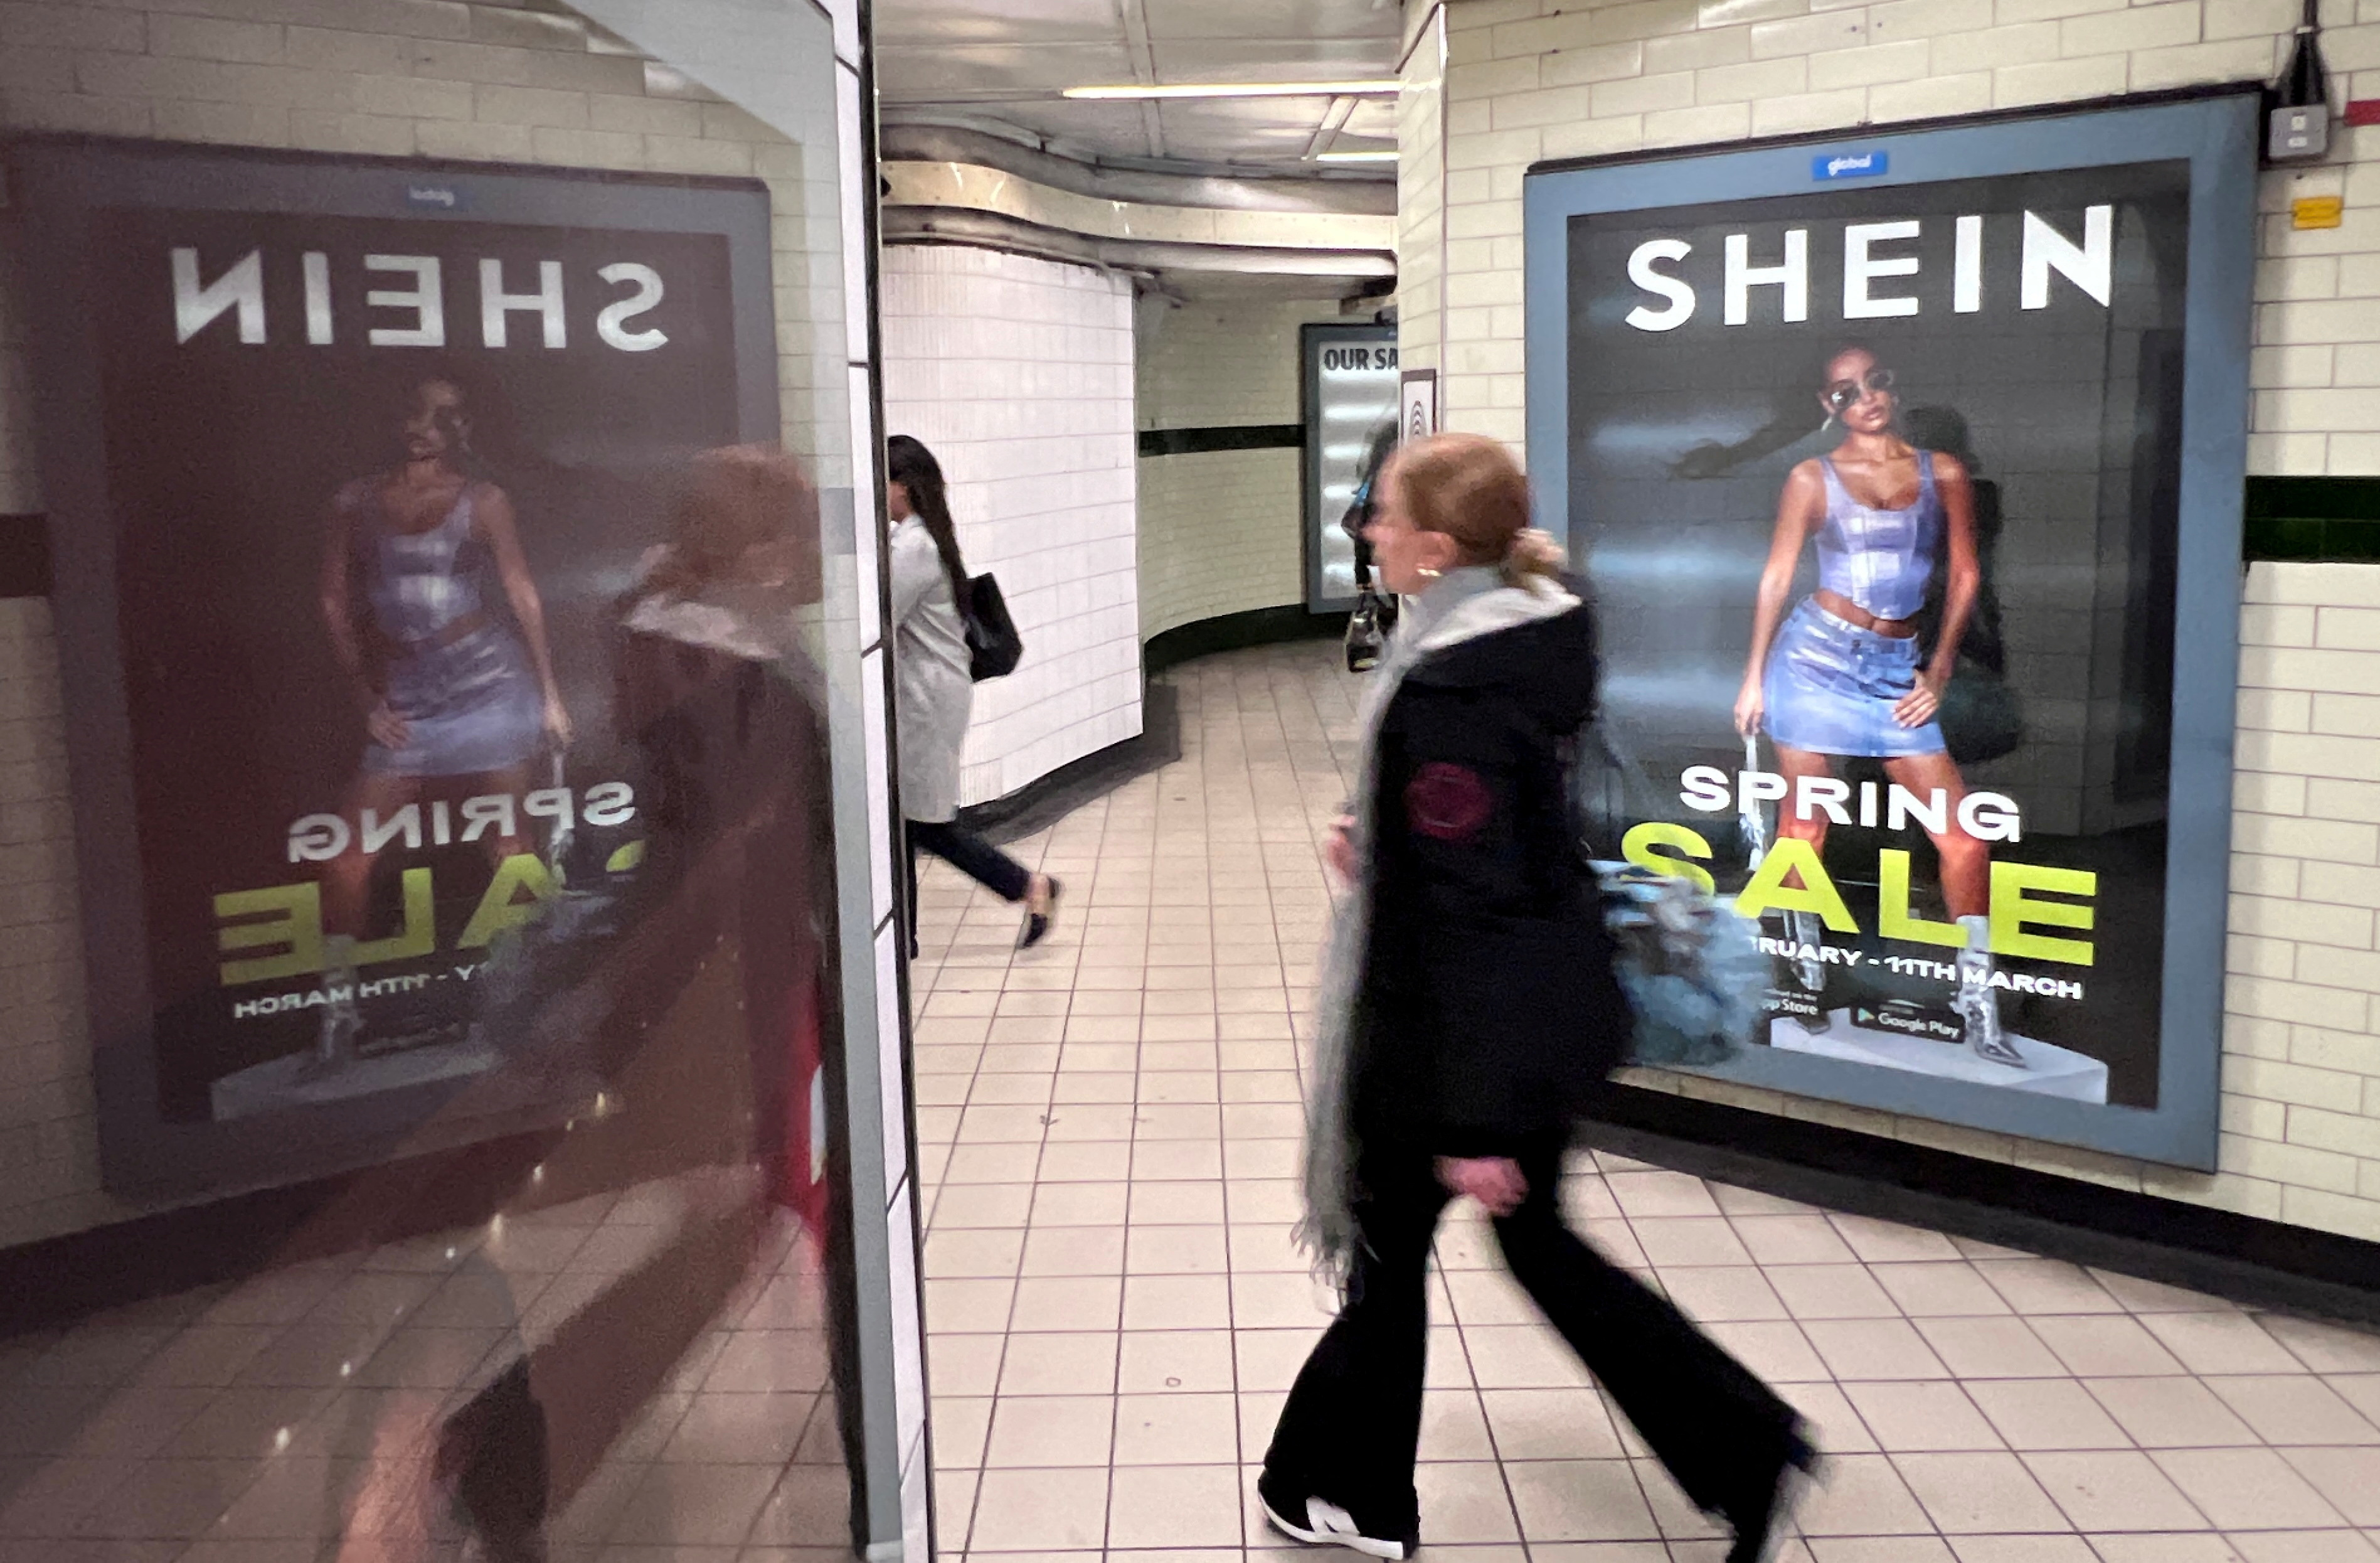 People walk past an advertisement for Shein